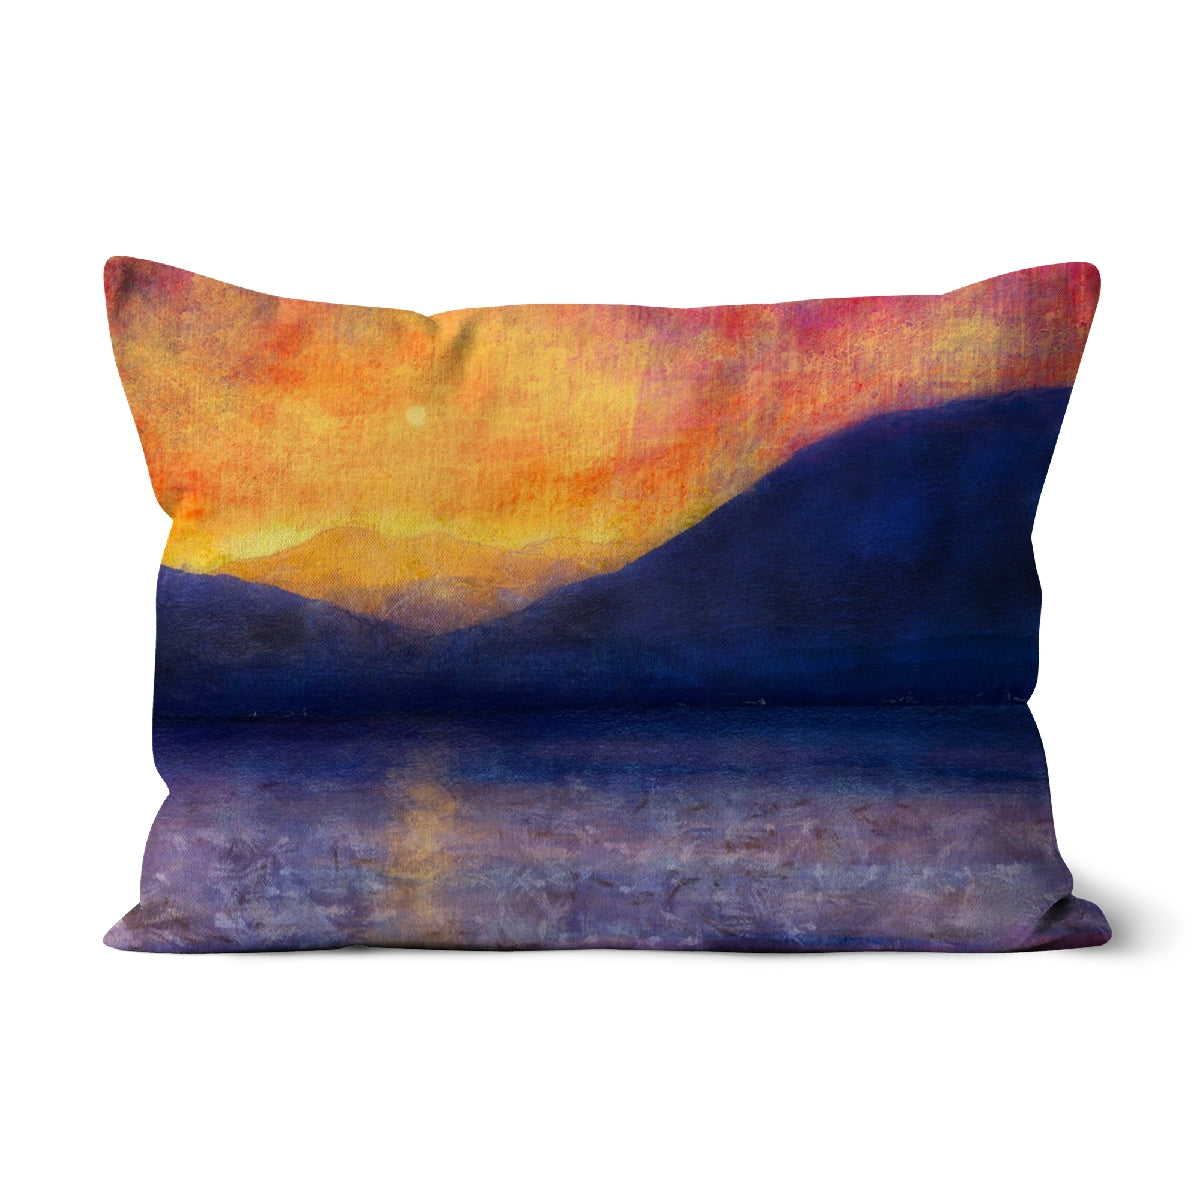 Sunset Approaching Mull Art Gifts Cushion-Cushions-Hebridean Islands Art Gallery-Linen-19"x13"-Paintings, Prints, Homeware, Art Gifts From Scotland By Scottish Artist Kevin Hunter